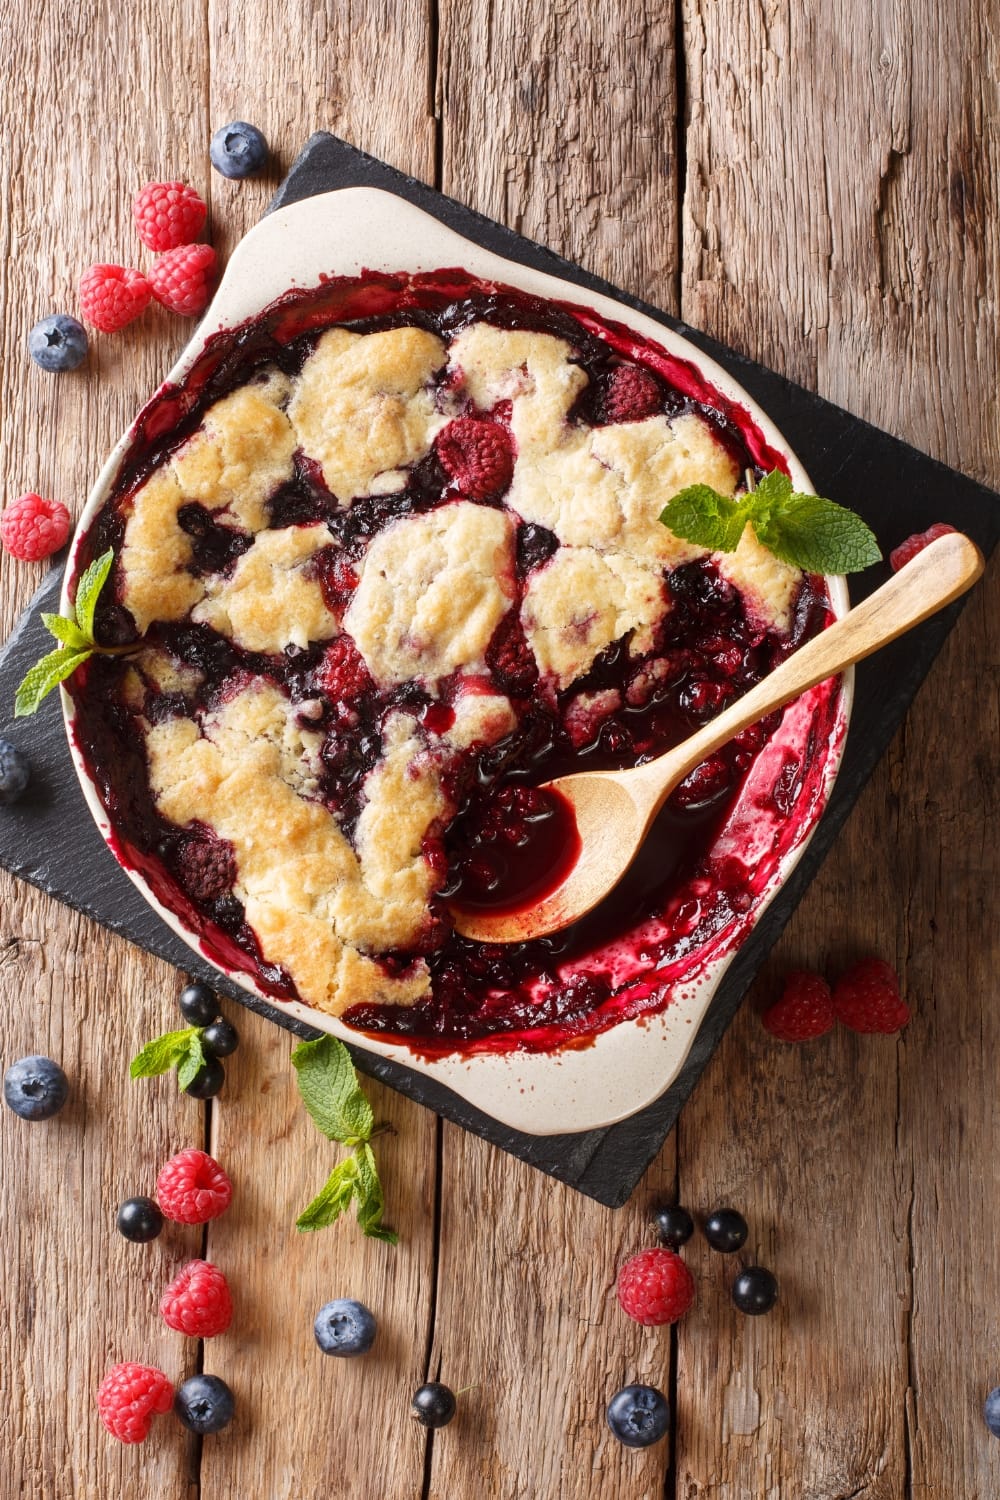 Berry Cobbler with Raspberries and Blueberries Jam Filling on a Round Baking Dish With a Wooden Spoon Dipped on it